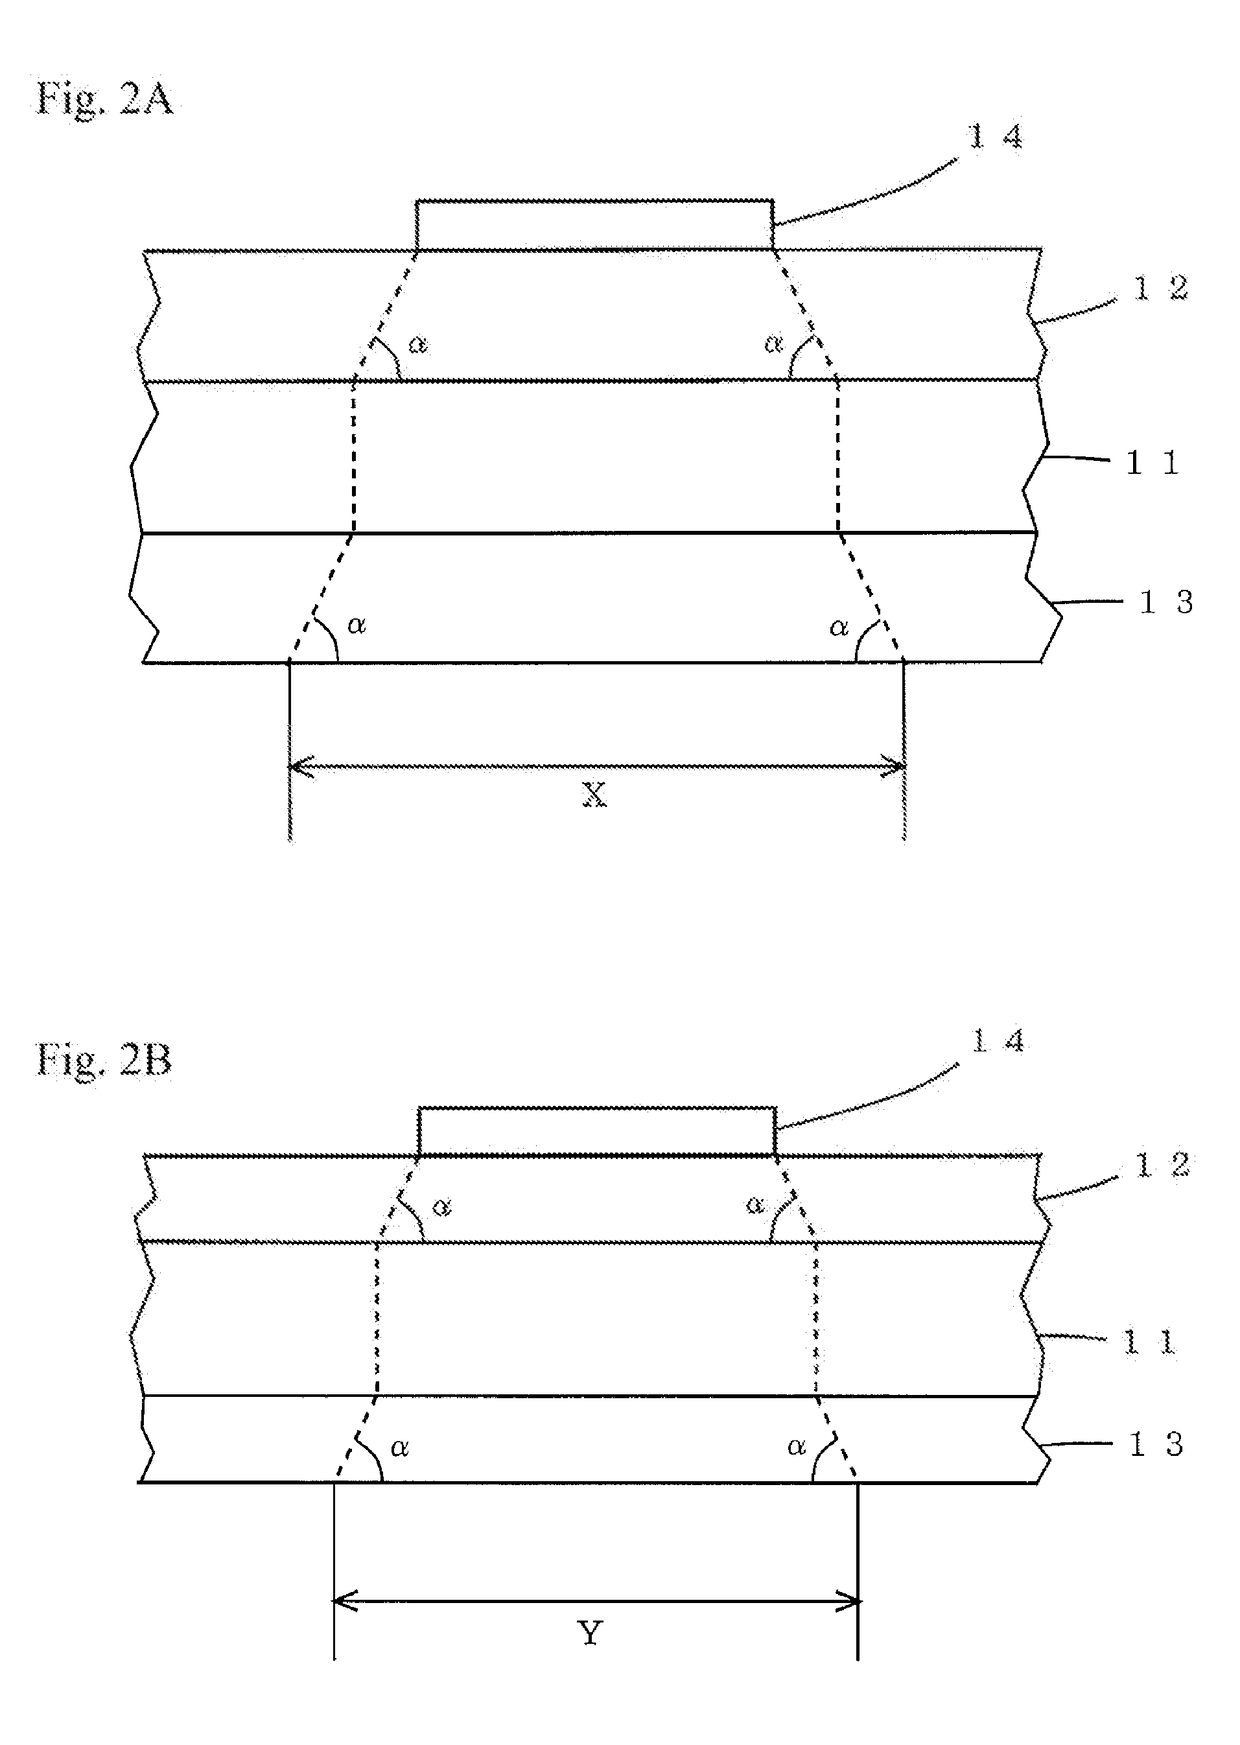 Substrate for power module, collective substrate for power modules, and method for manufacturing substrate for power module